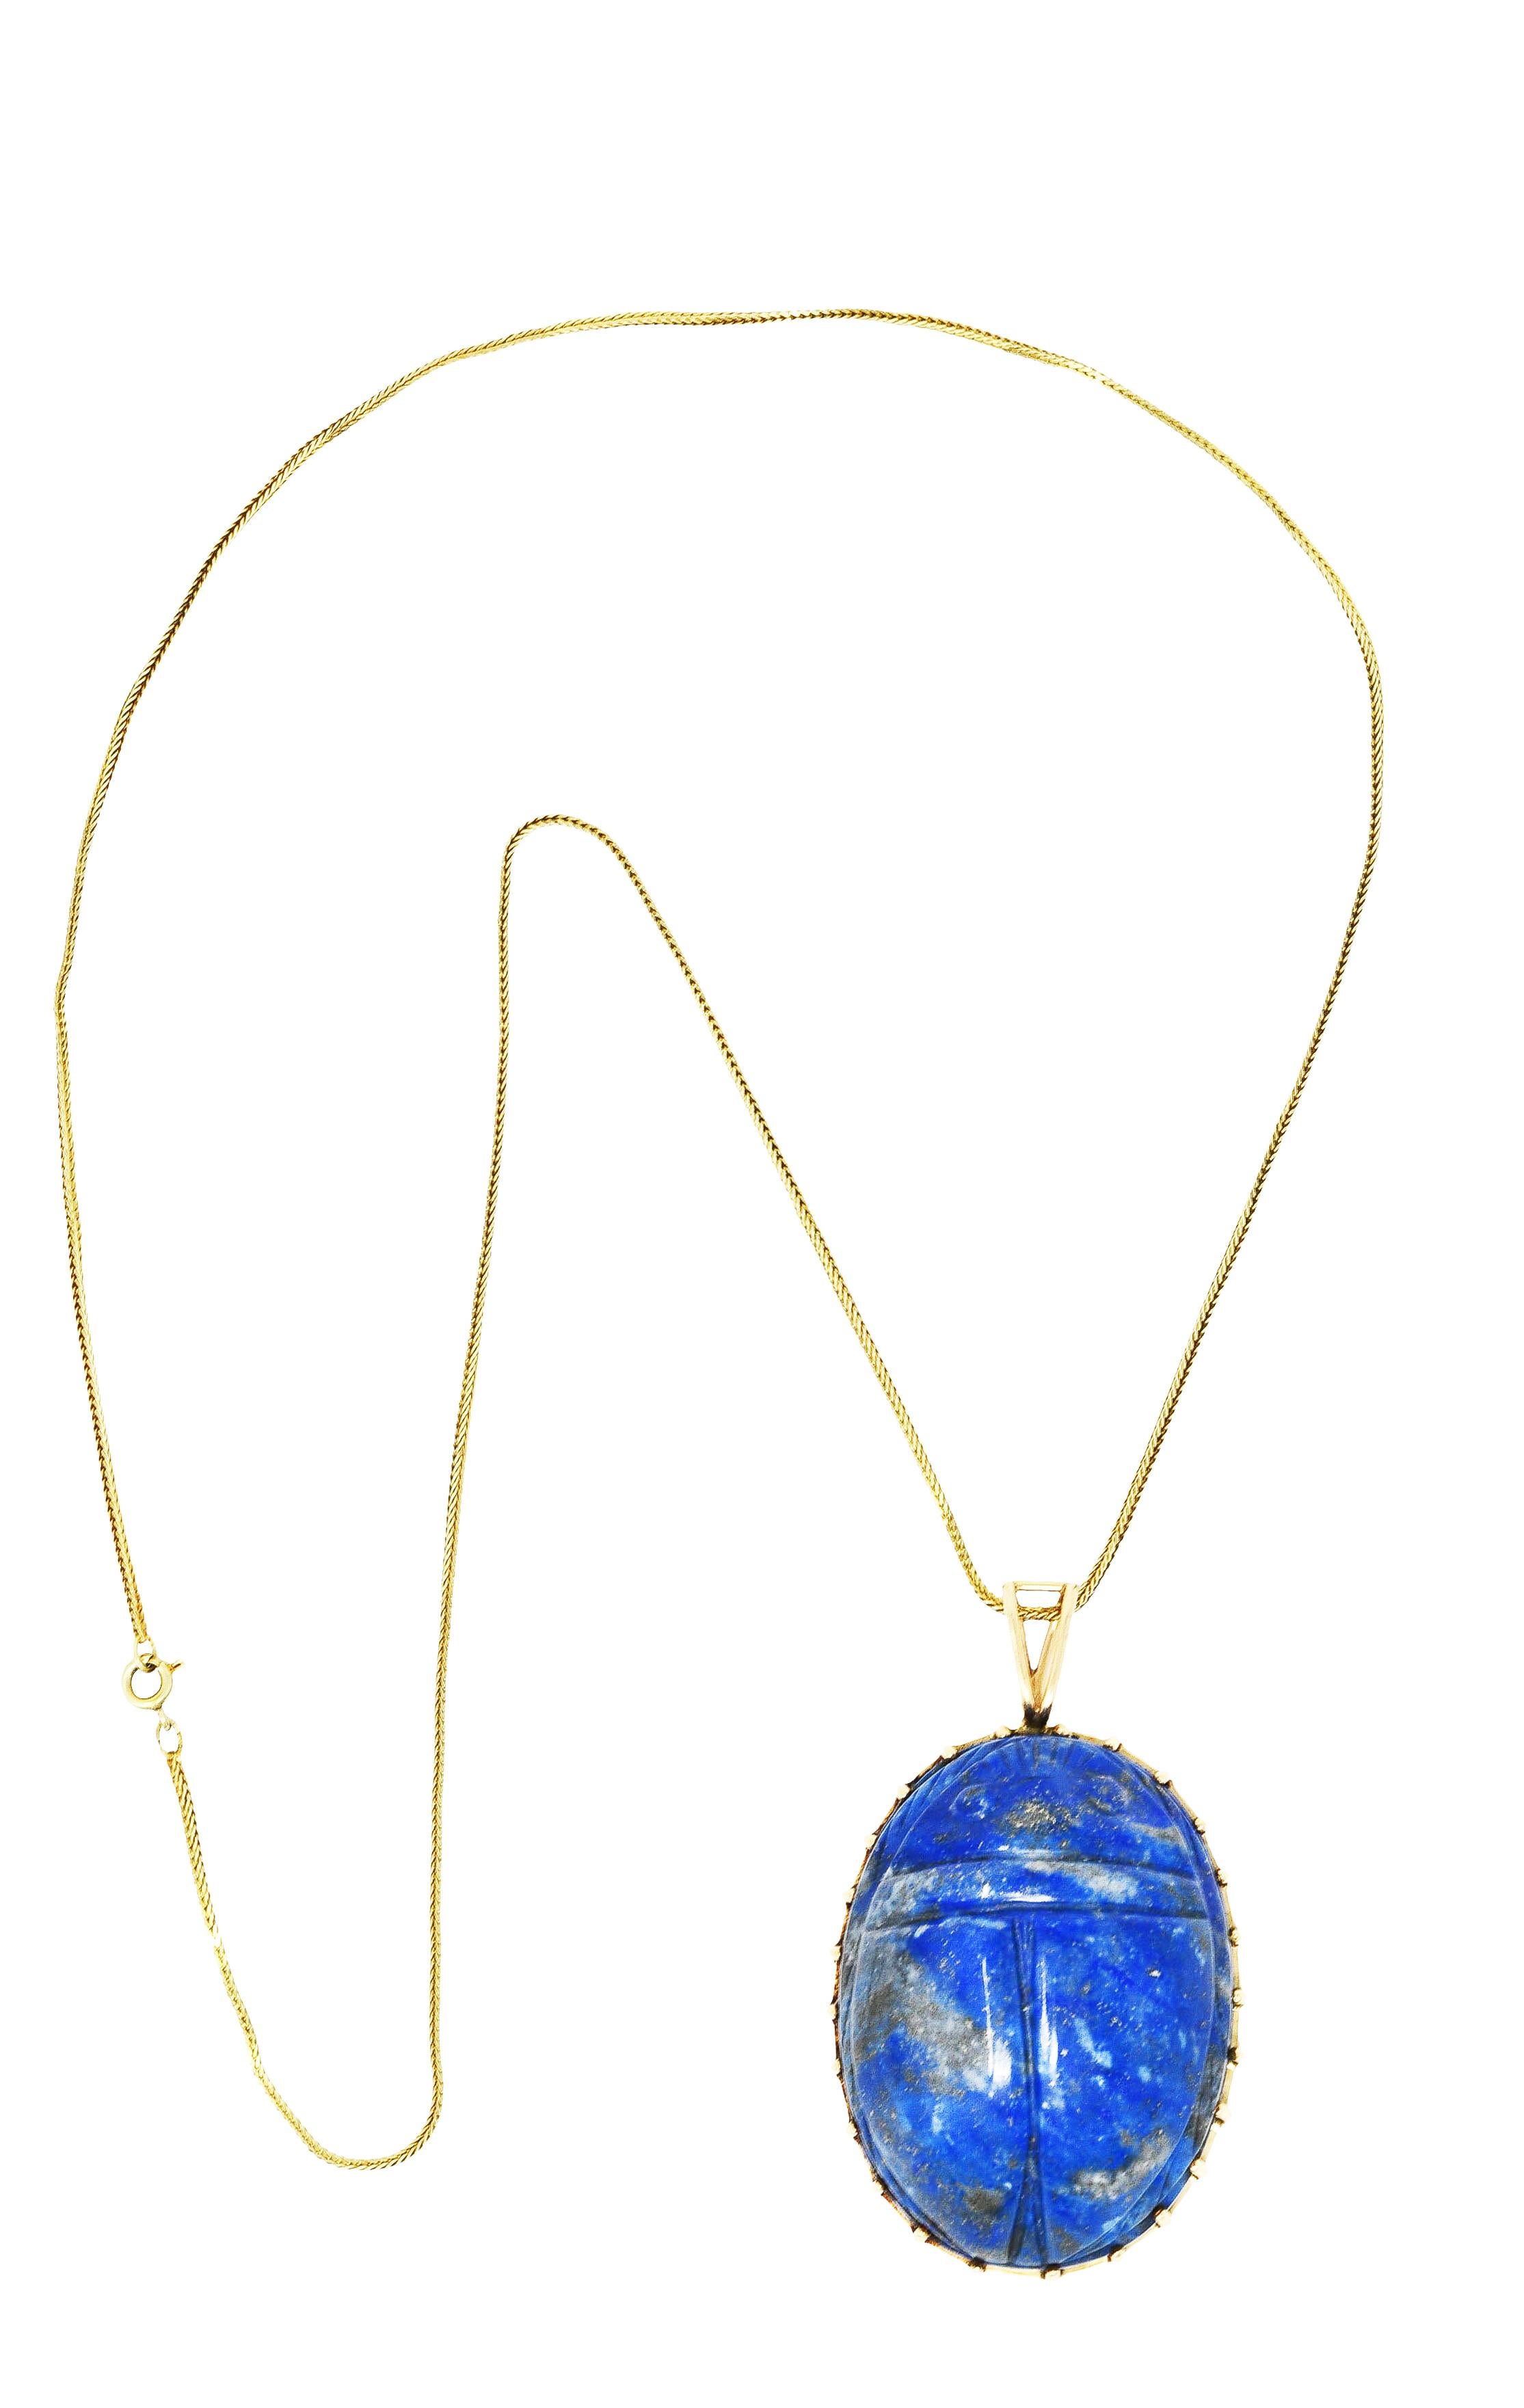 Necklace designed as gold box chain suspending lapis lazuli scarab pendant

Scarab beetle carving features grooved back and ridged legs

Lapis is opaque ultramarine blue with strong light to dark grey mottling and pyrite flecks

Set in arching high